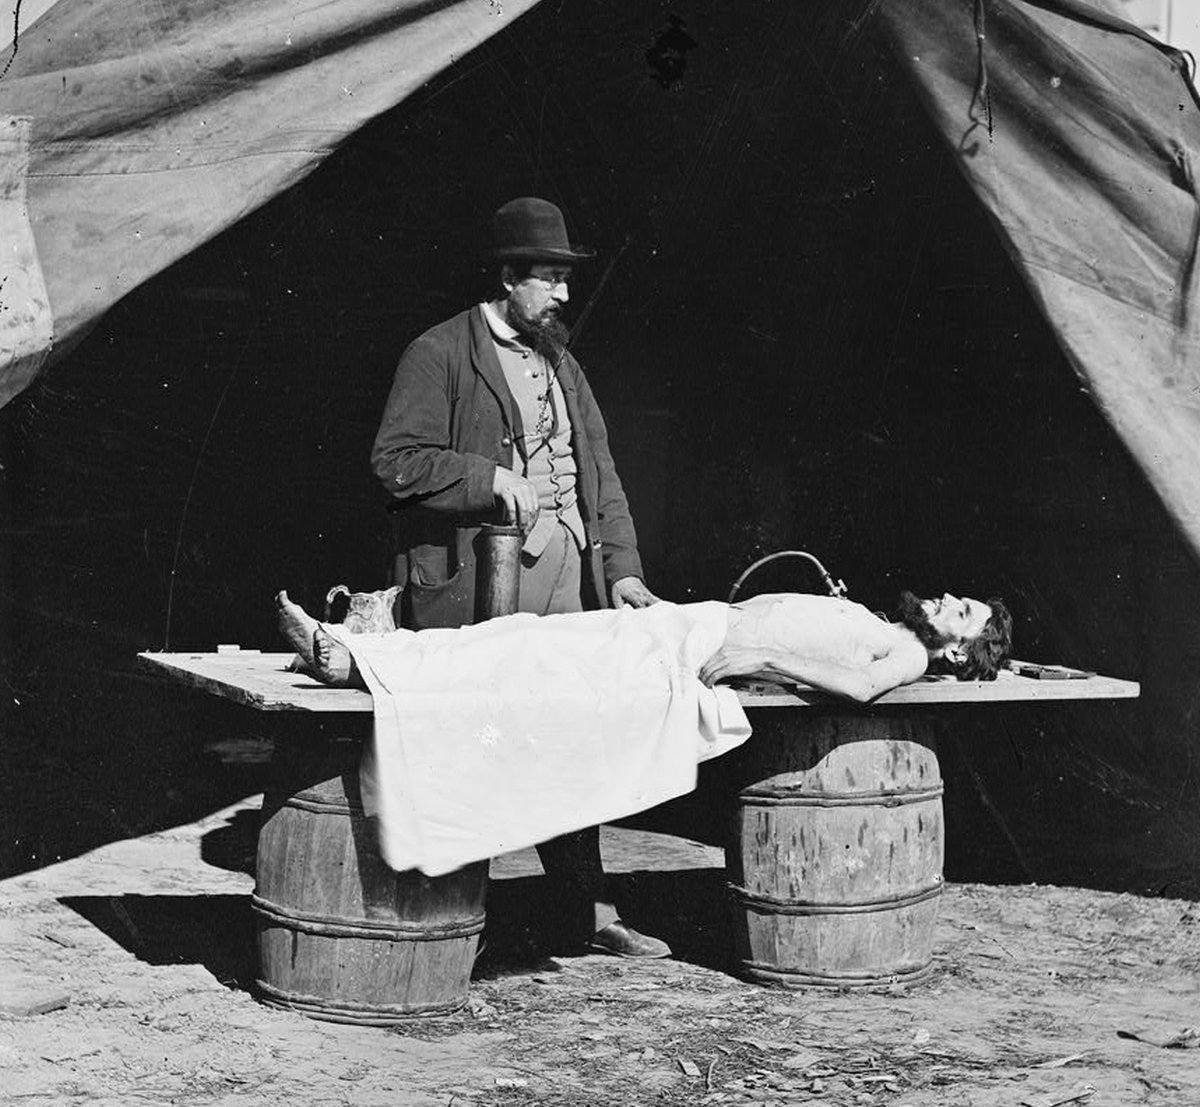 (8/11) Pictured here is the embalmer Richard Burr, who was sued when he took possession of a soldier’s body after battle and then tried to extort $100 from the family for its release.